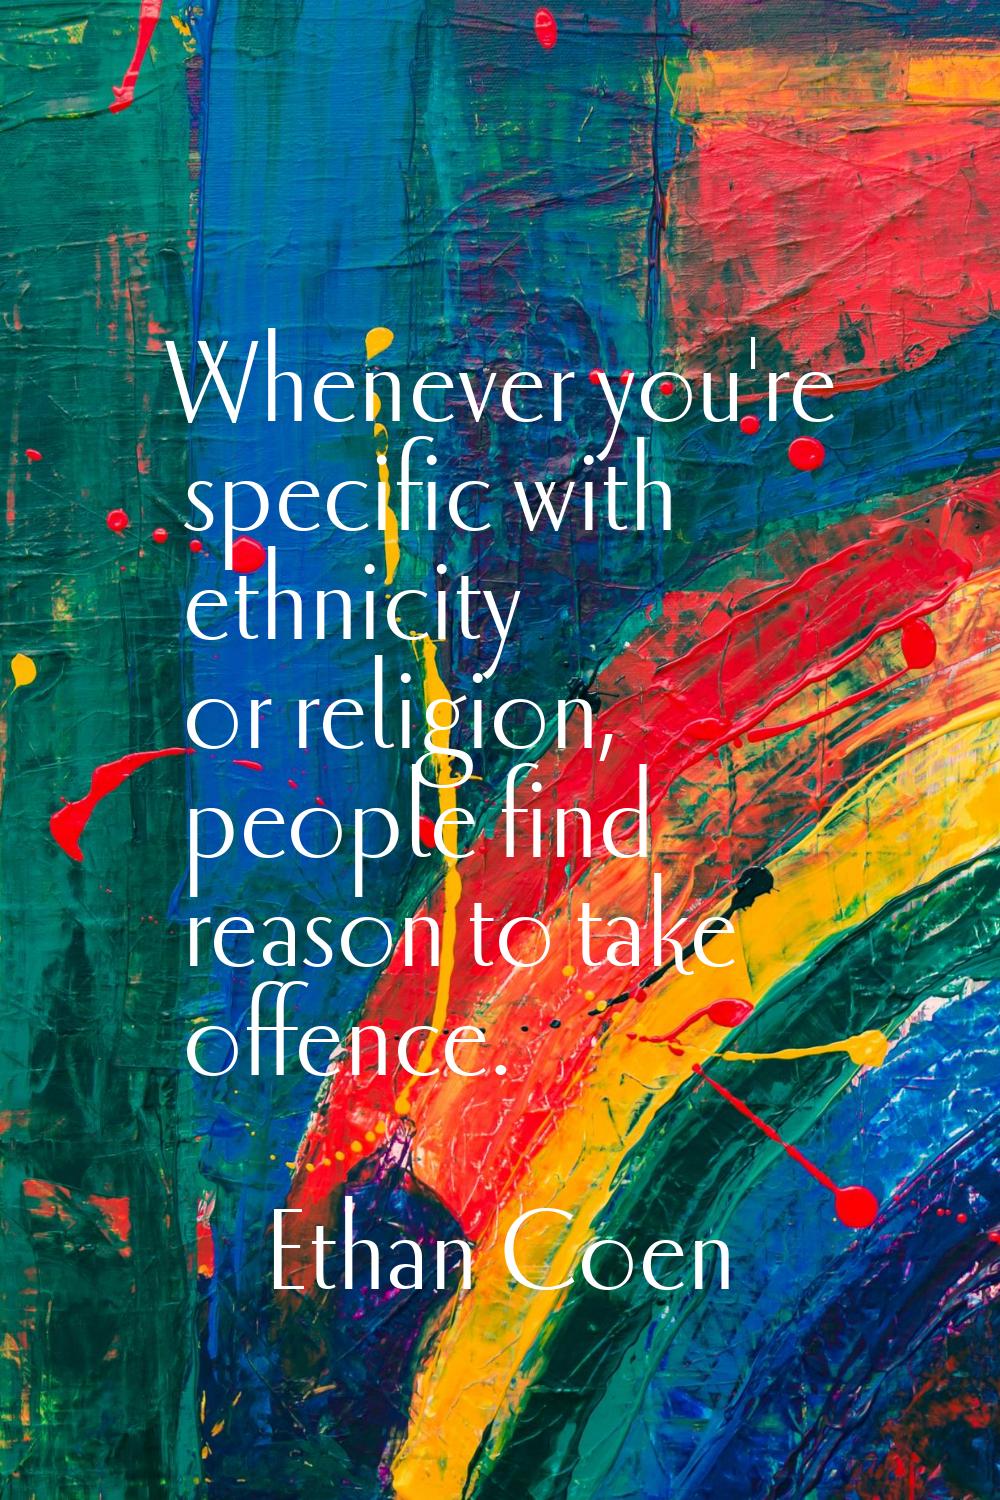 Whenever you're specific with ethnicity or religion, people find reason to take offence.